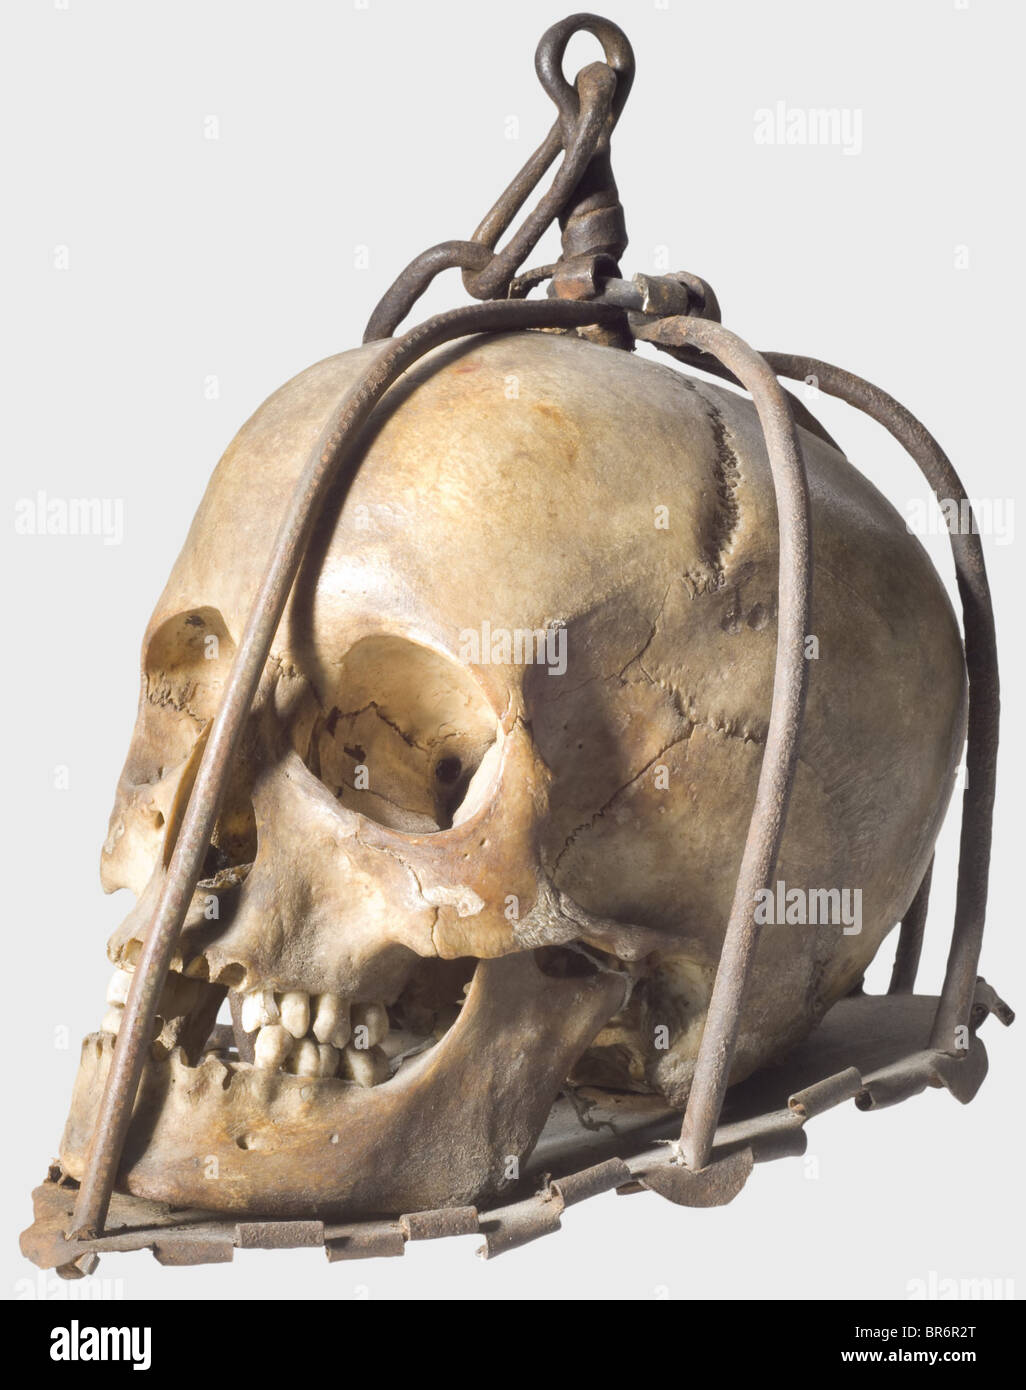 A skull of an execution victim, Germany, 16th/17th century. Wrought iron cage consisting of six bars (one replaced), cotter-pinned to an iron baseplate. The bars joined at the crown with an attached suspension chain. Within the cage a female(?) skull showing clear sign of age. Height 22 cm. Devices like this were hung at execution places to deter delinquents. historic, historical,, people, 17th century, 16th century, instrument of torture, torture device, instruments of torture, torture devices, object, objects, stills, clipping, clippings, cut out, cut-out, cu, Stock Photo